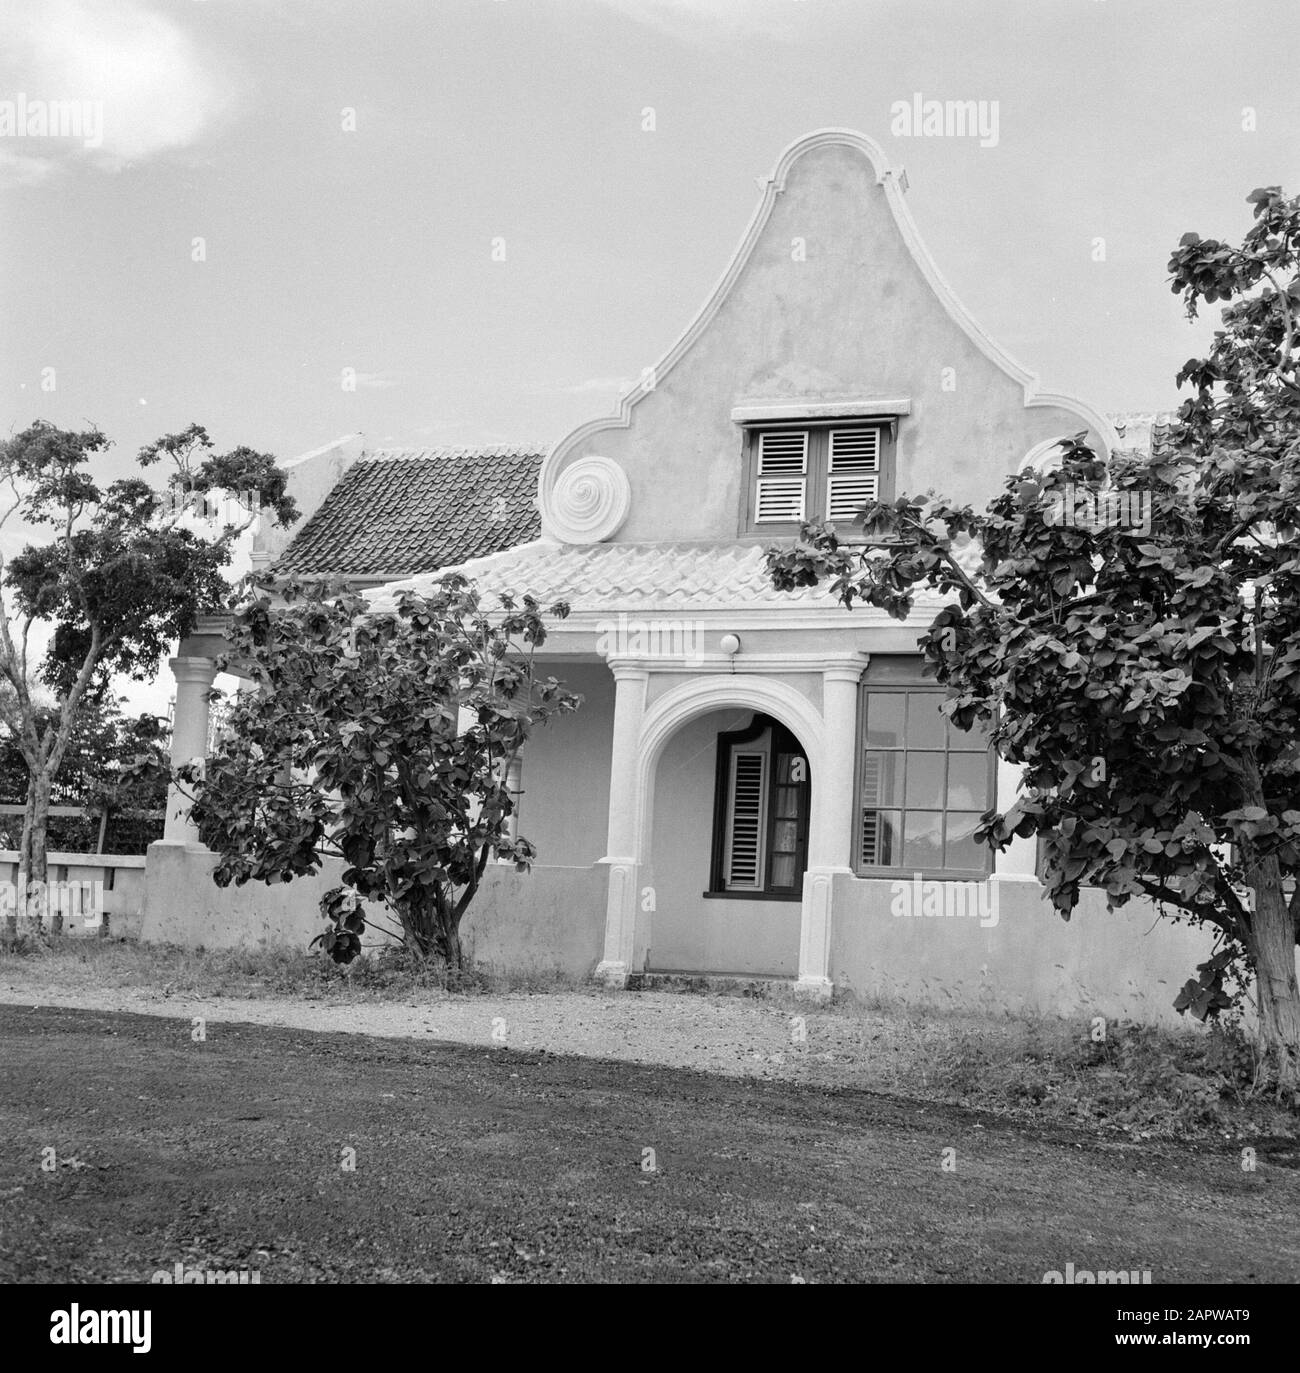 Netherlands Antilles and Suriname at the time of the royal visit of Queen Juliana and Prince Bernhard in 1955  Country house Zeelandia on Curaçao Date: October 1955 Location: Curaçao Keywords: buildings Institution name: Zeelandia Stock Photo